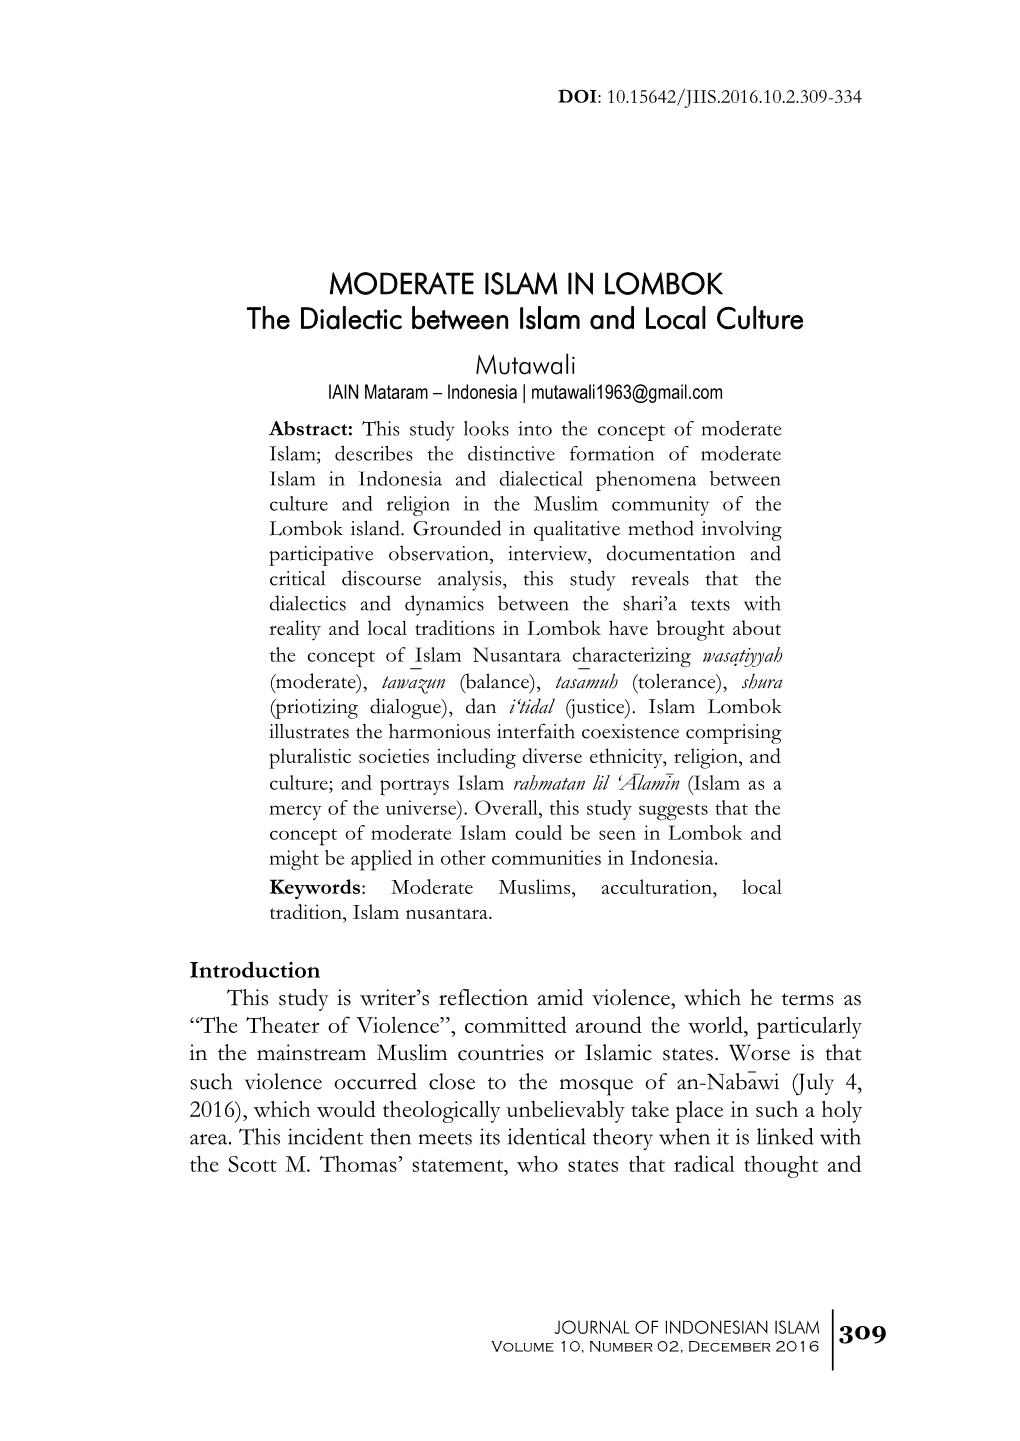 MODERATE ISLAM in LOMBOK the Dialectic Between Islam and Local